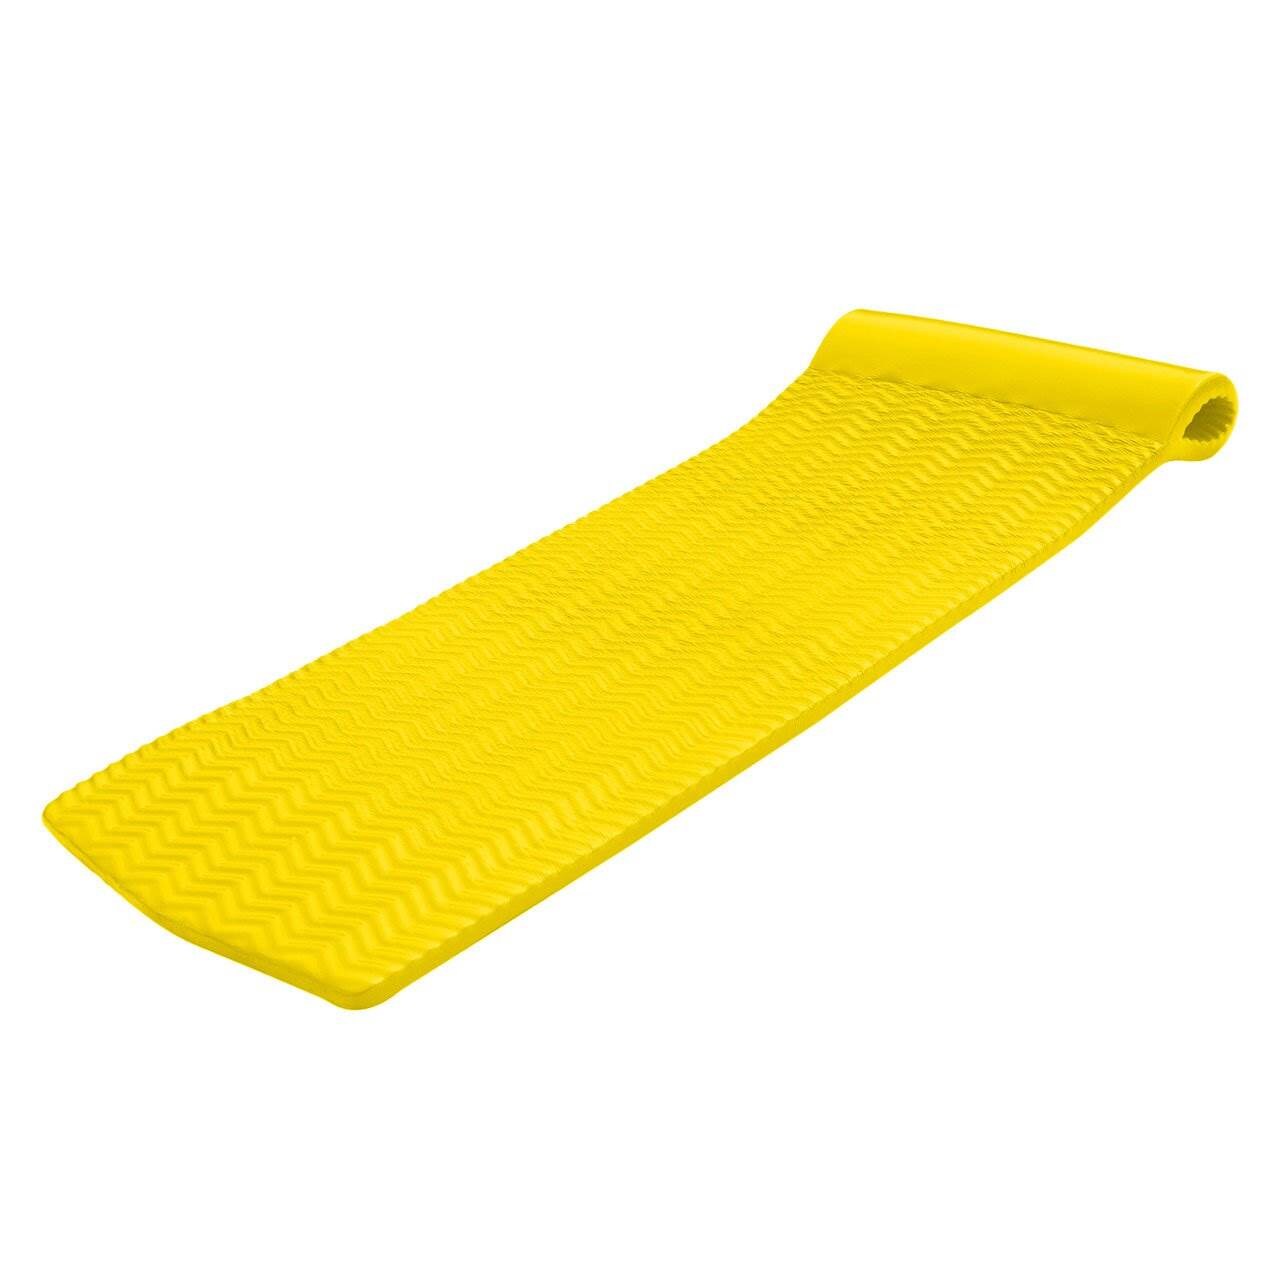 Yellow TRC Recreation Serenity 70 Inch Thick Foam Mat Raft Lounger Pool Float 